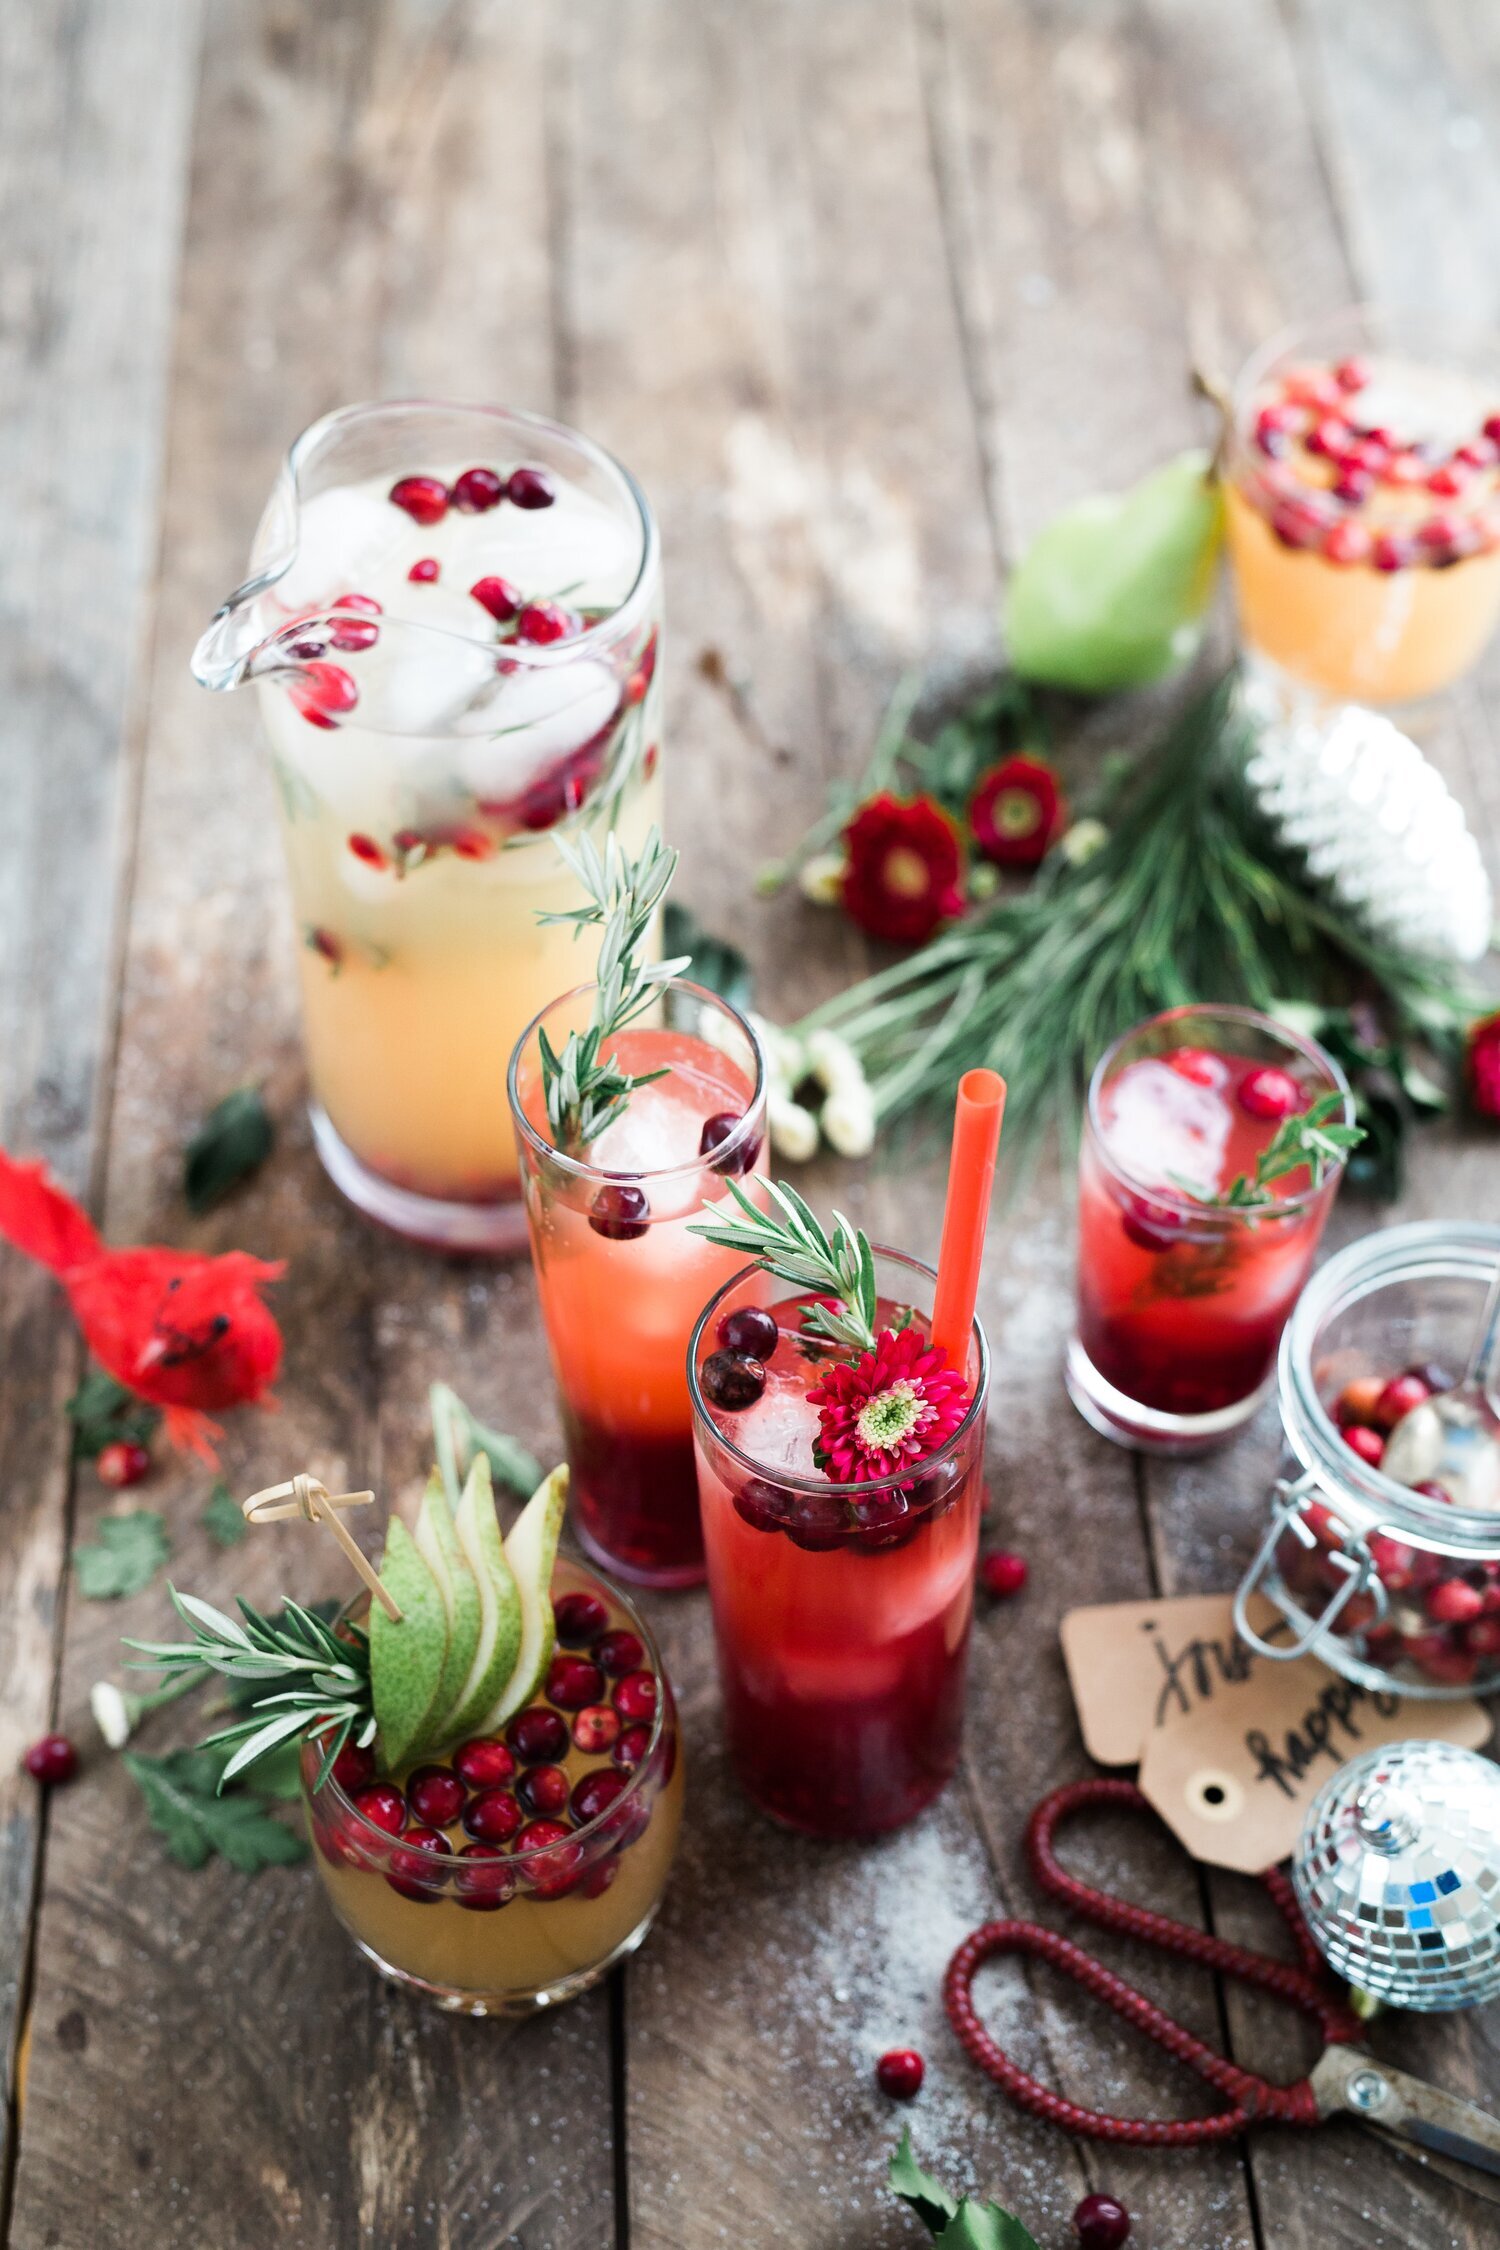 A Very Merry Mocktail (or cocktail 😉)